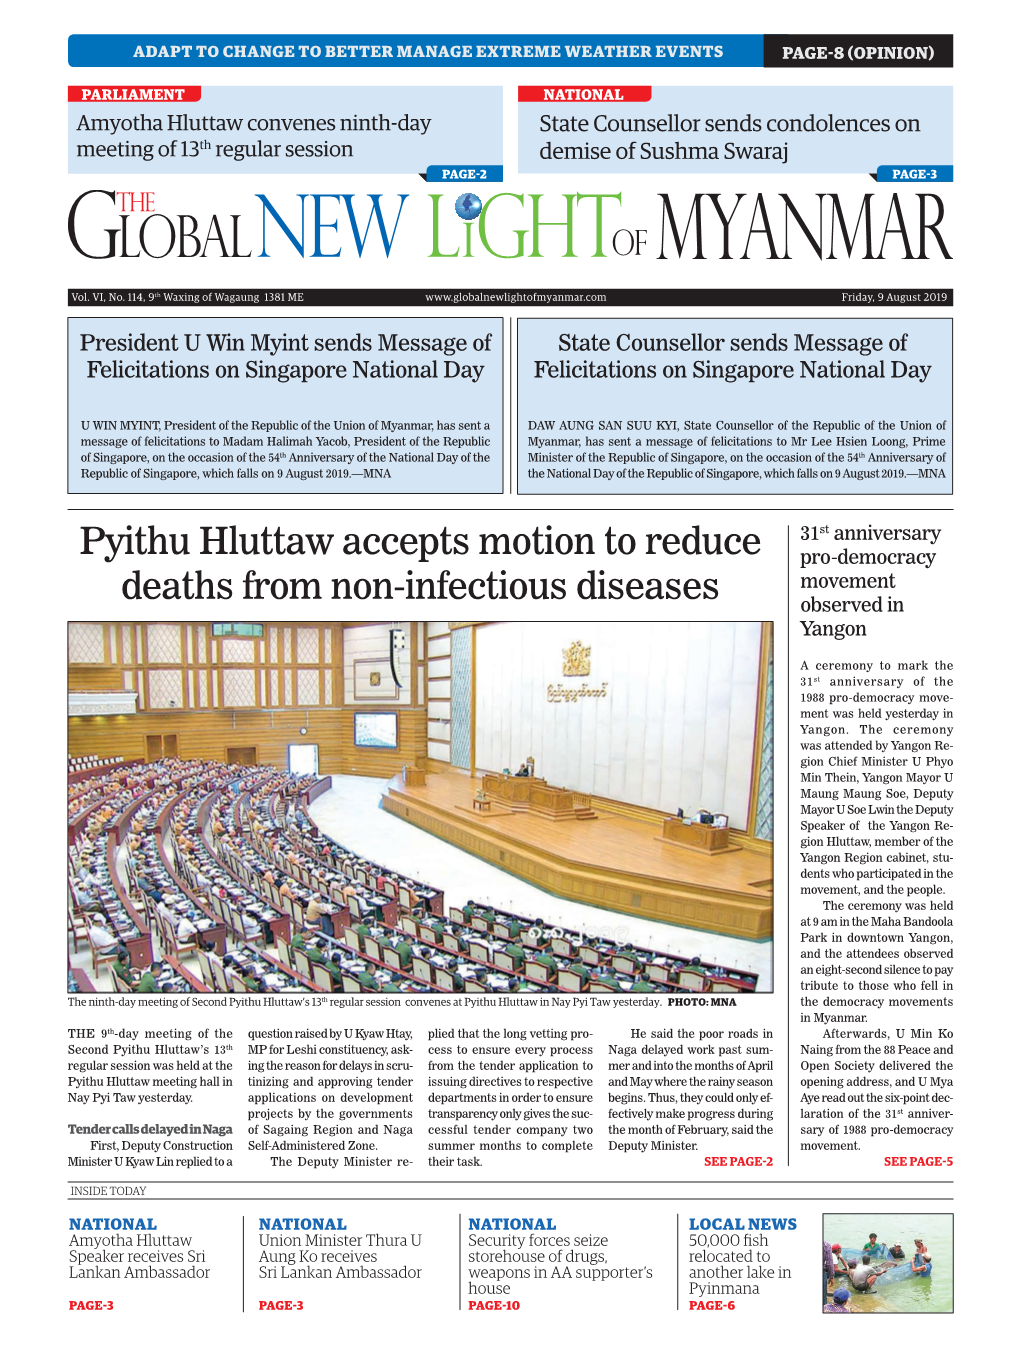 Pyithu Hluttaw Accepts Motion to Reduce Pro-Democracy Movement Deaths from Non-Infectious Diseases Observed in Yangon